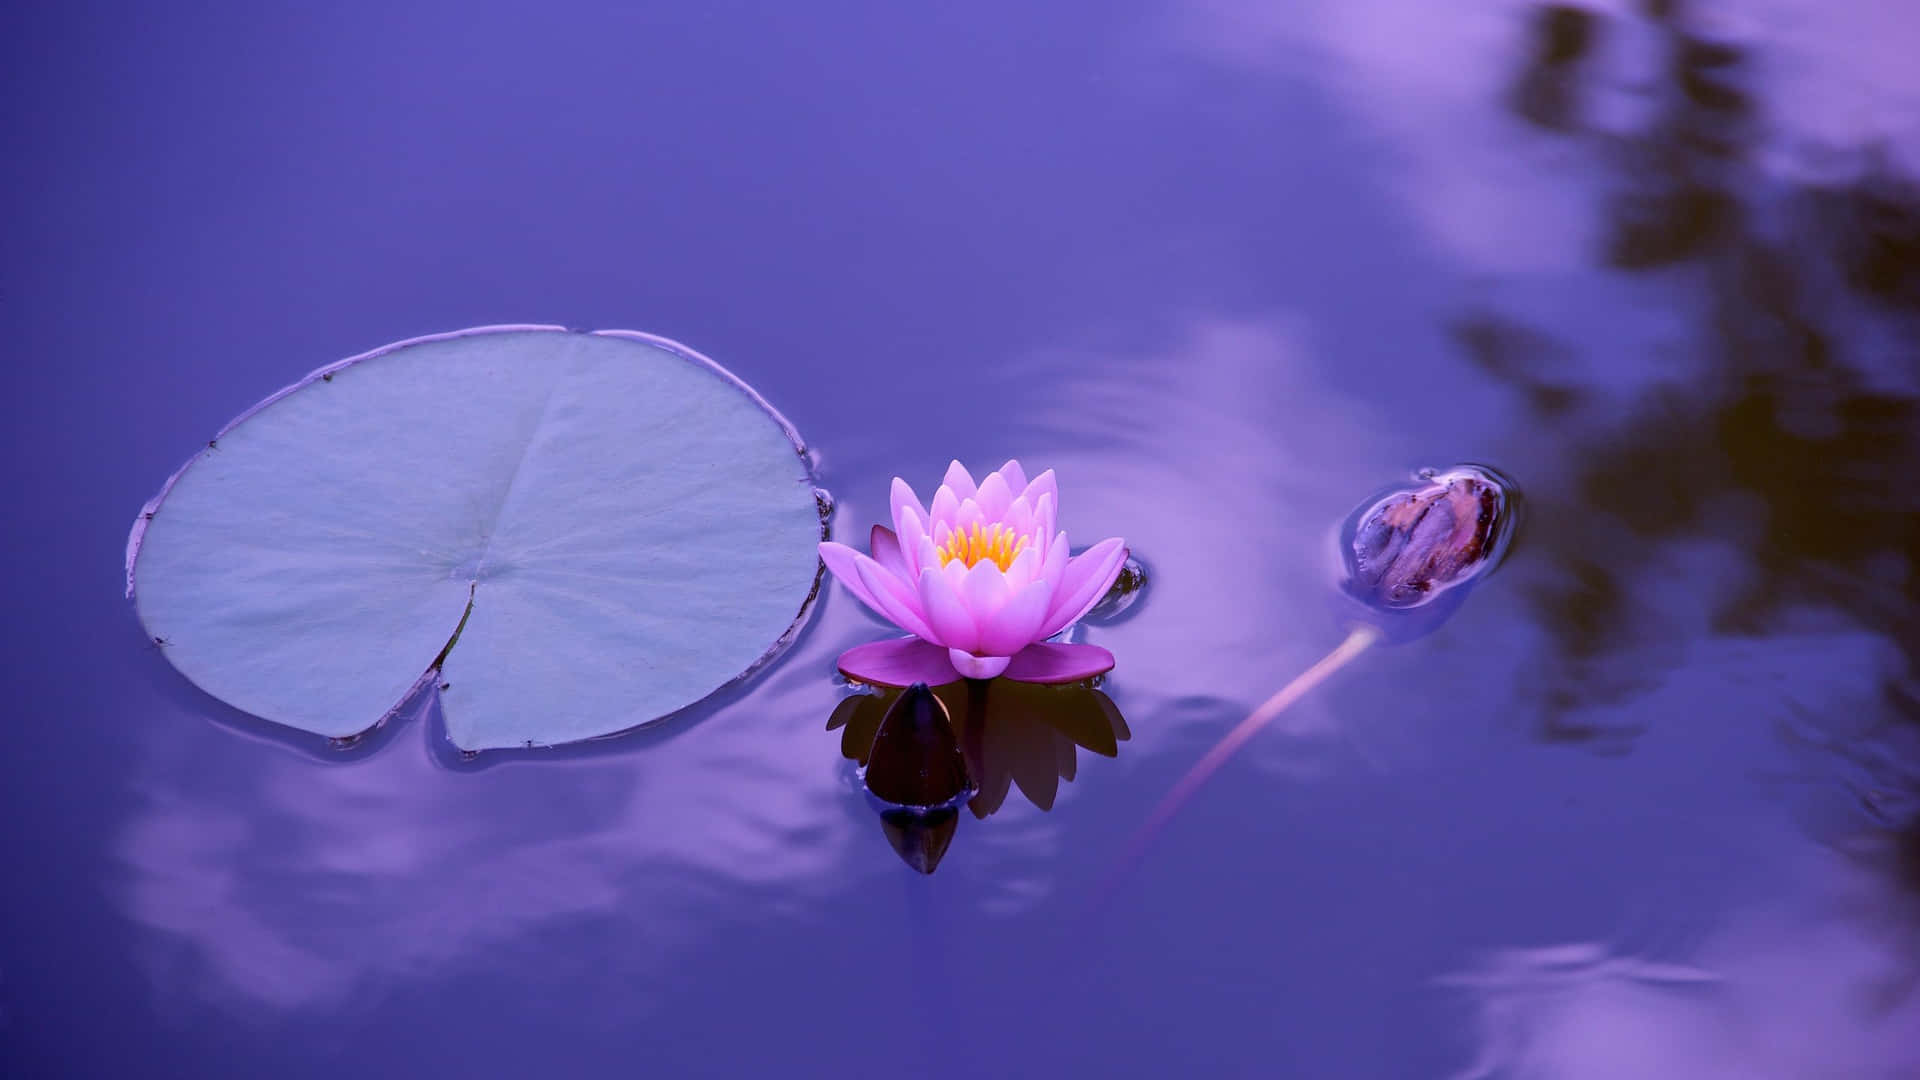 A lotus flower resting atop a sparkling lake